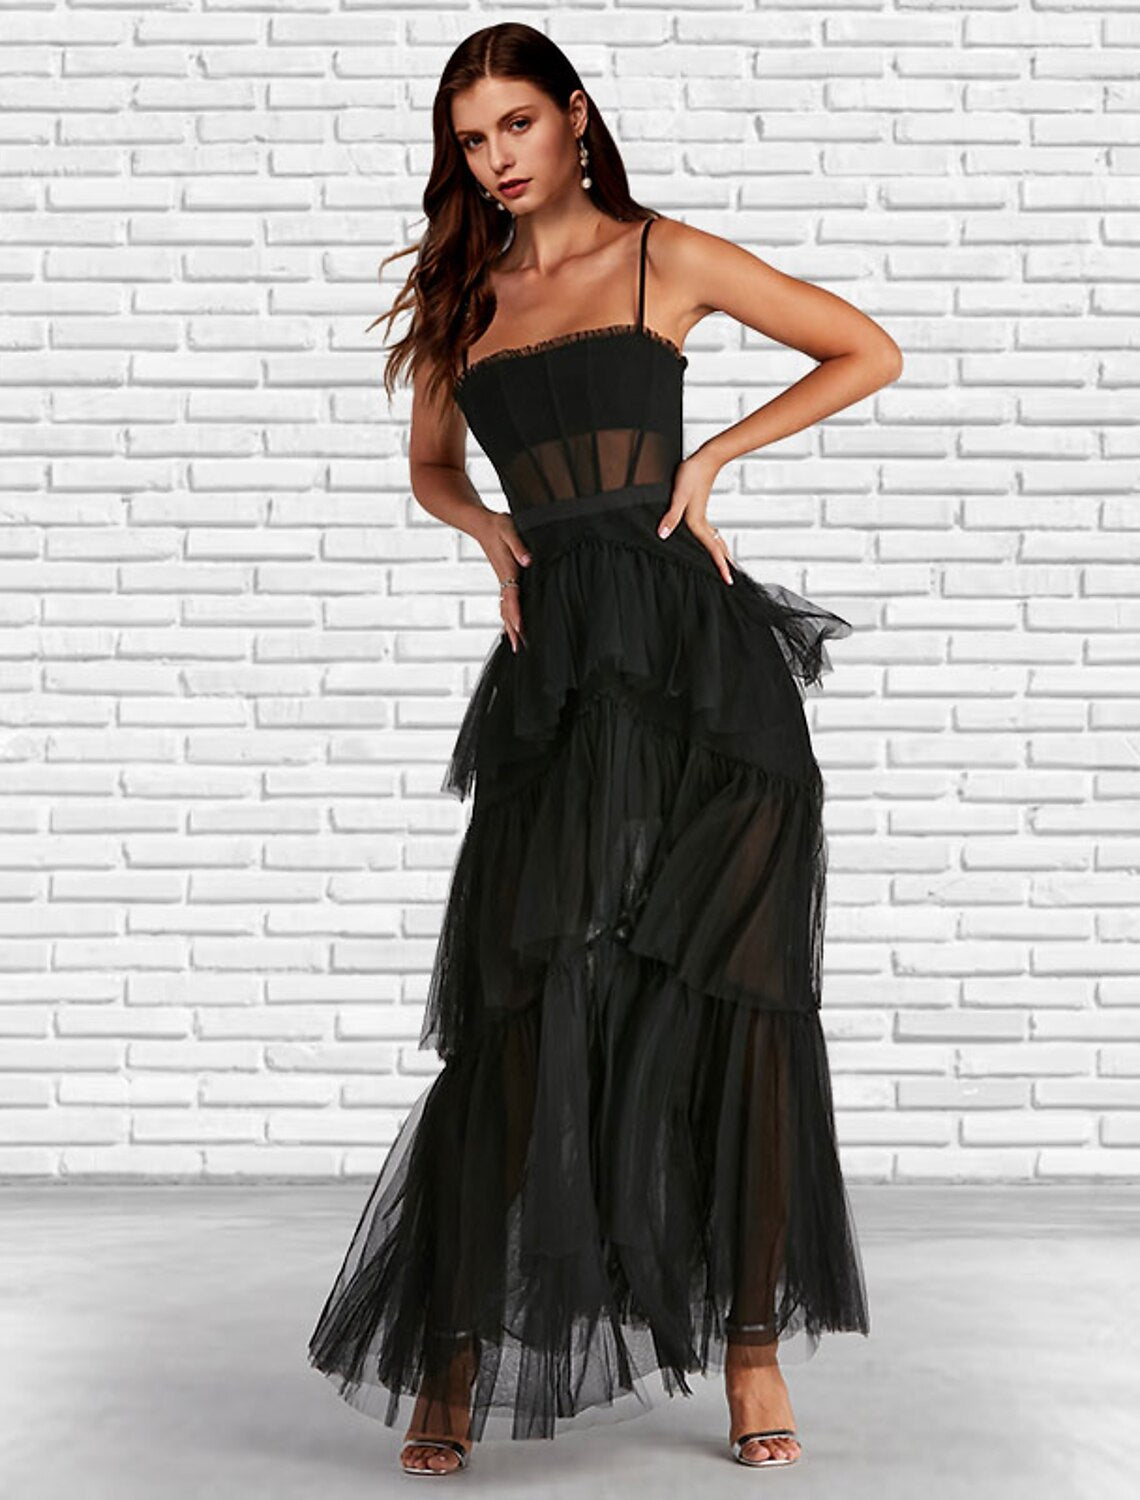 A-Line Prom Dresses Corsets Dress Party Wear Ankle Length Sleeveless Strapless Tulle Ladder Back with Ruffles